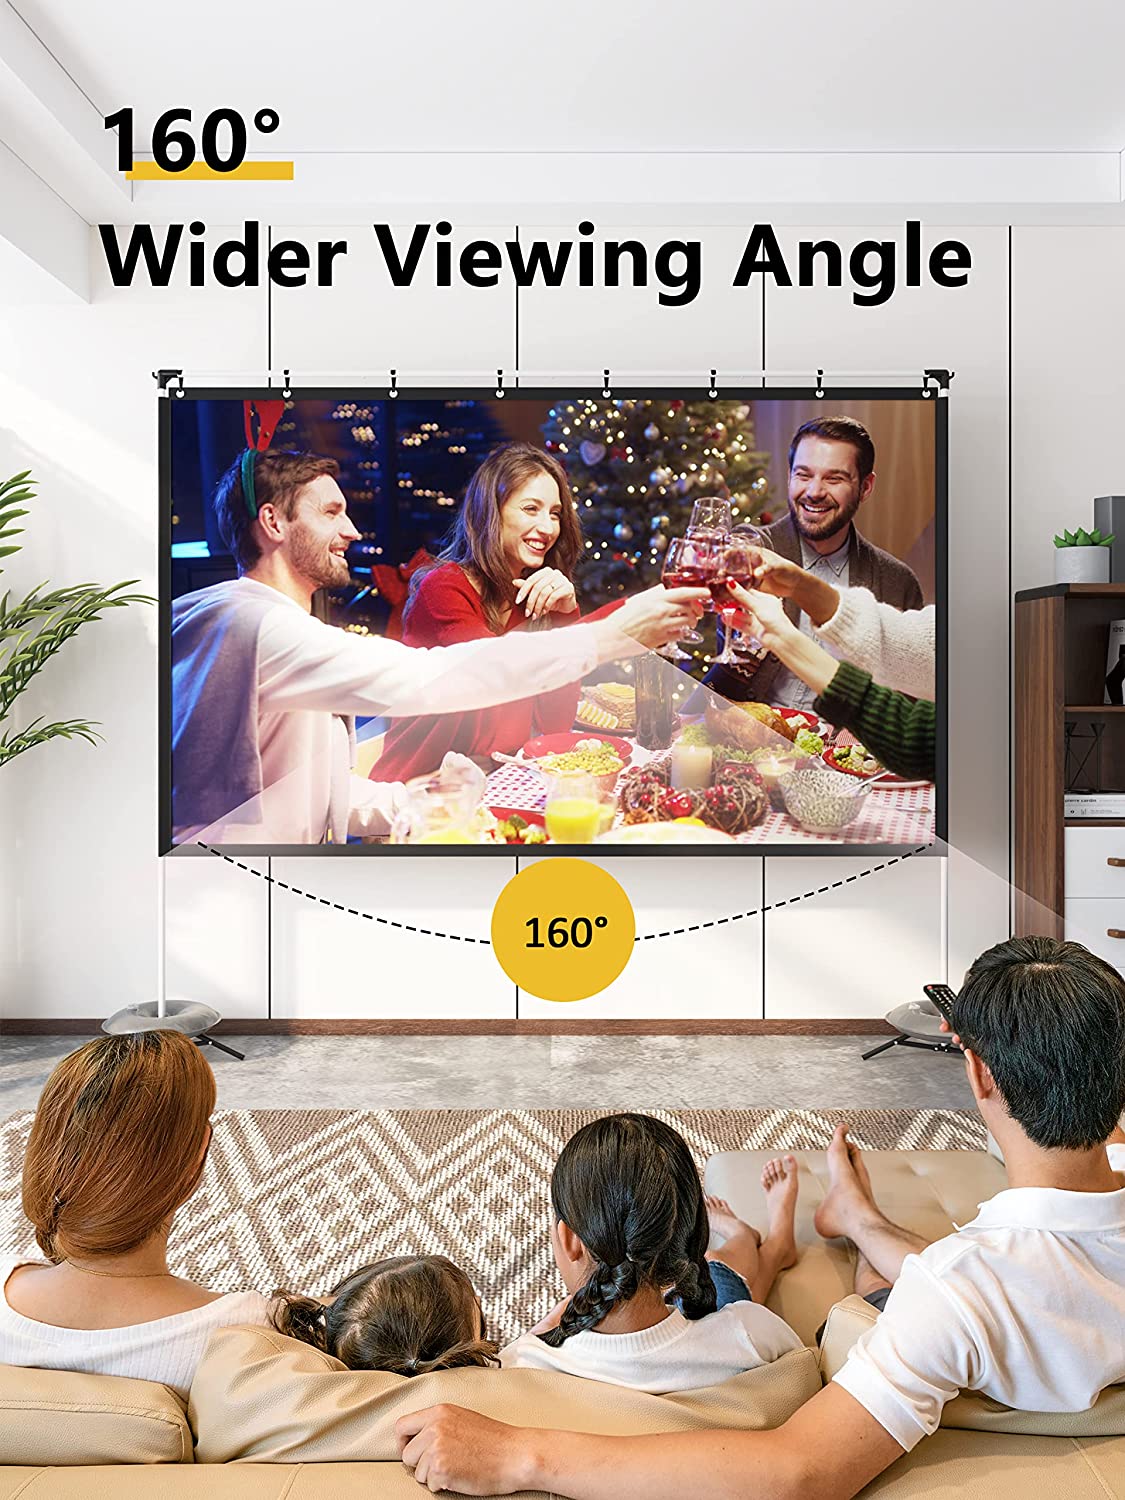 Portable Projector Screen with Stand, WEWATCH 120 inch Foldable Projection Screen 16:9, 4K HD Outdoor Movies Screen with Carry Bag for Indoor Home Theater Backyard Travel - image 5 of 6